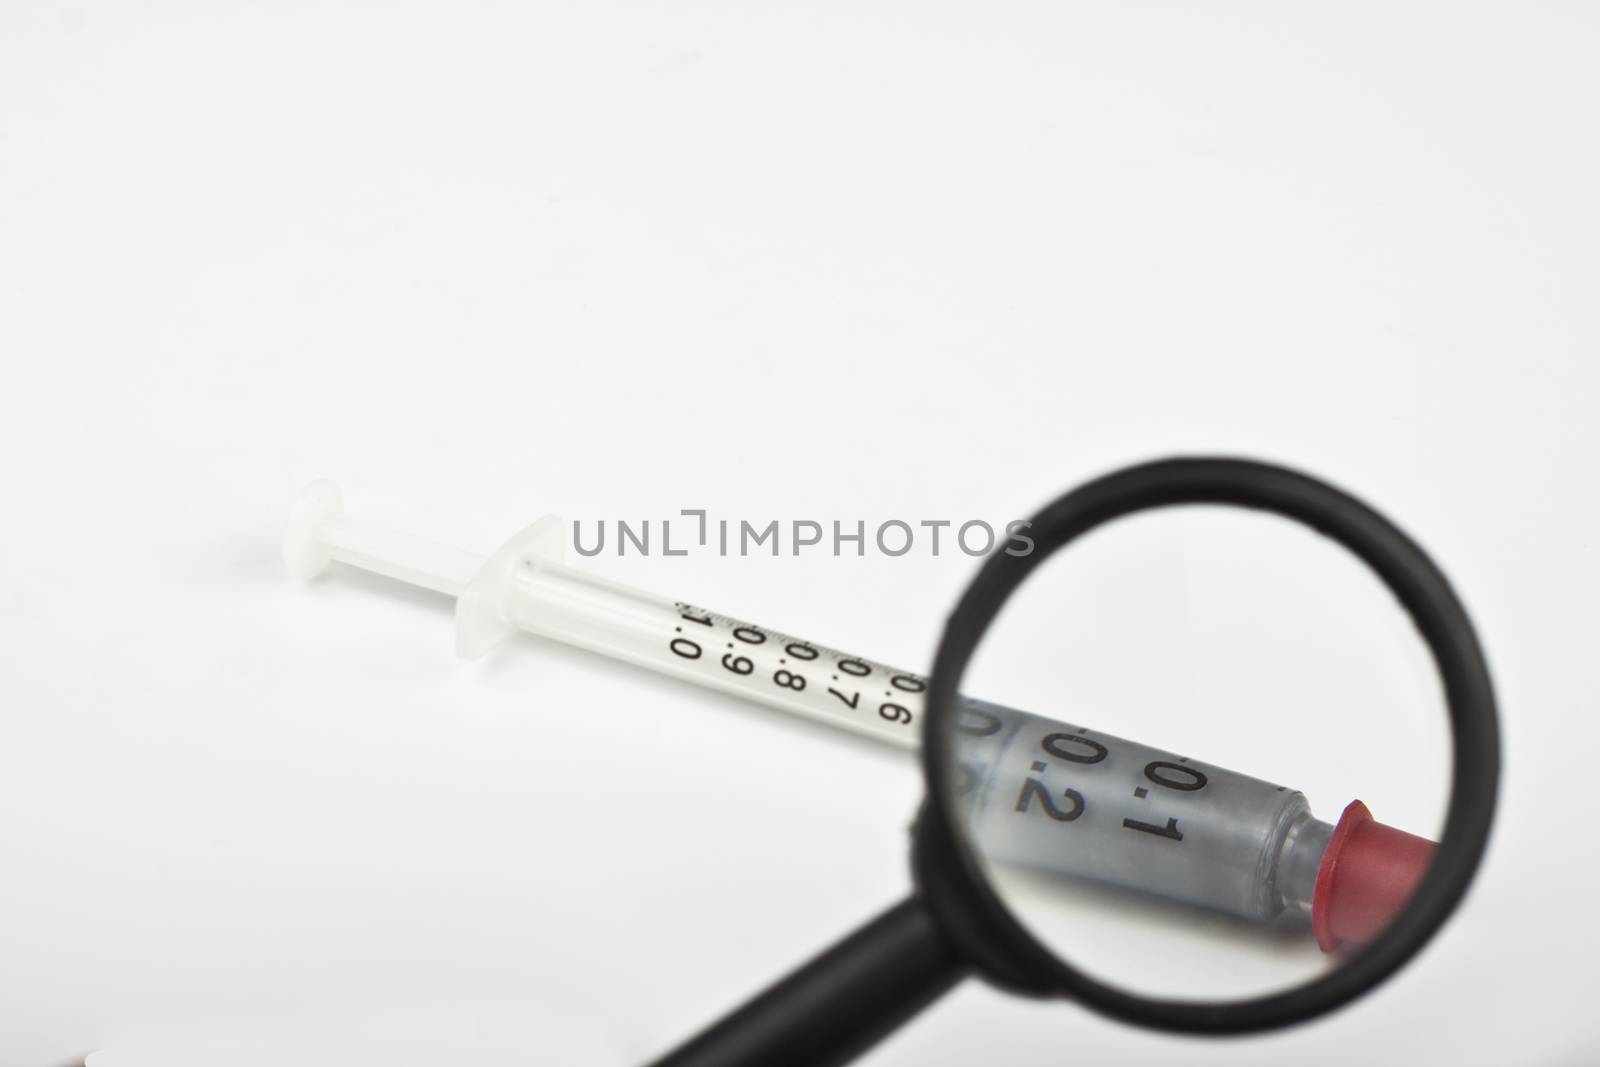 syringe with a magnifying glass on white background